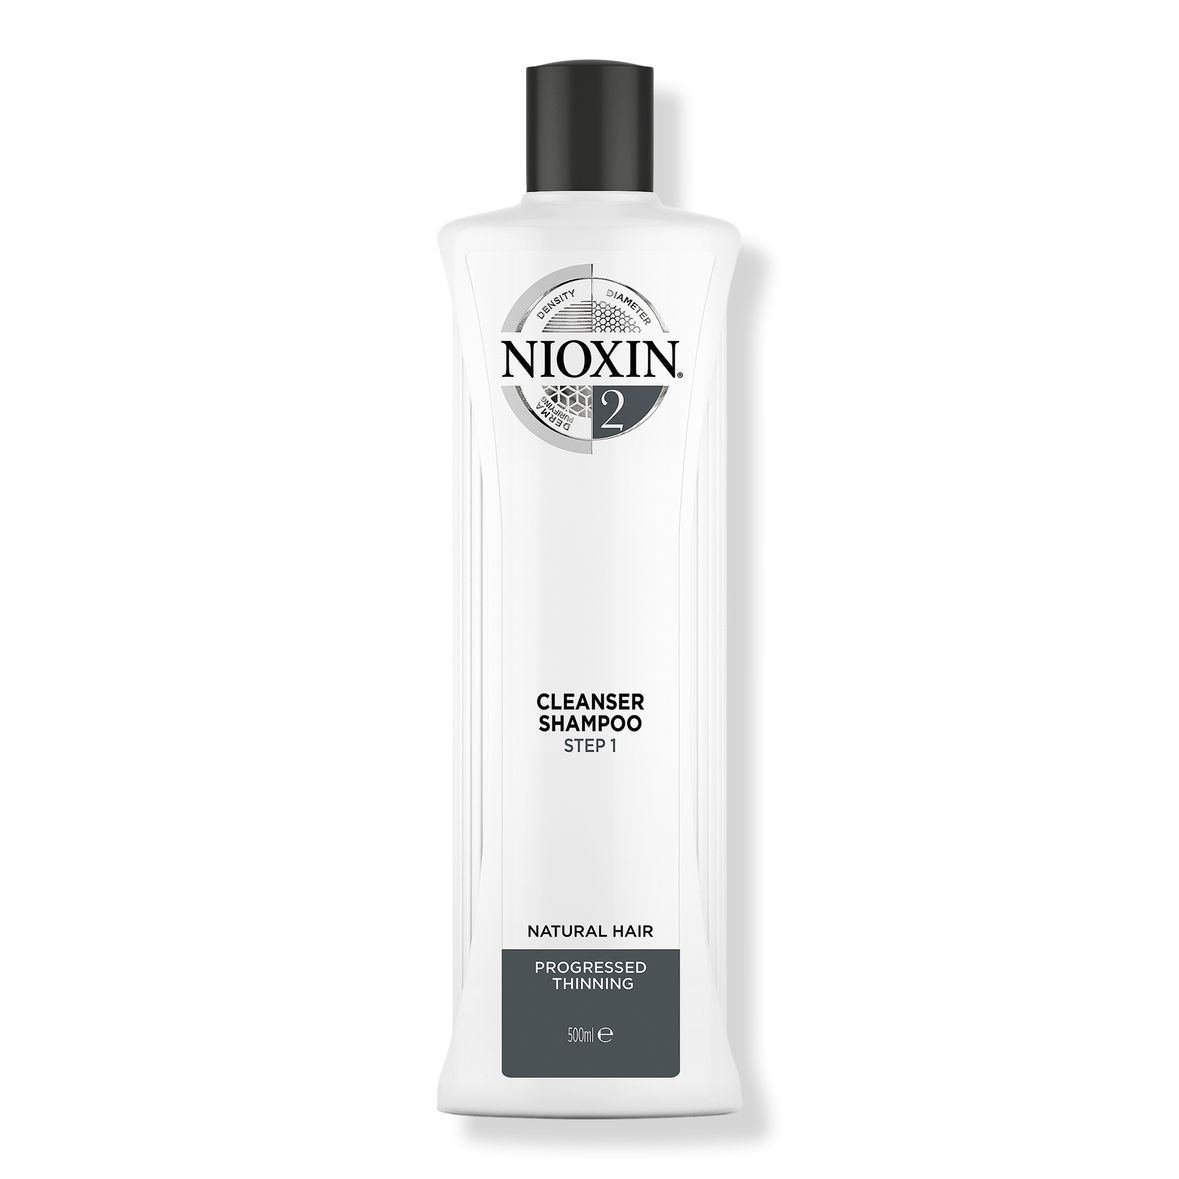 NioxinCleanser Shampoo System 2 For Fine Hair With Progressed Thinning | Ulta